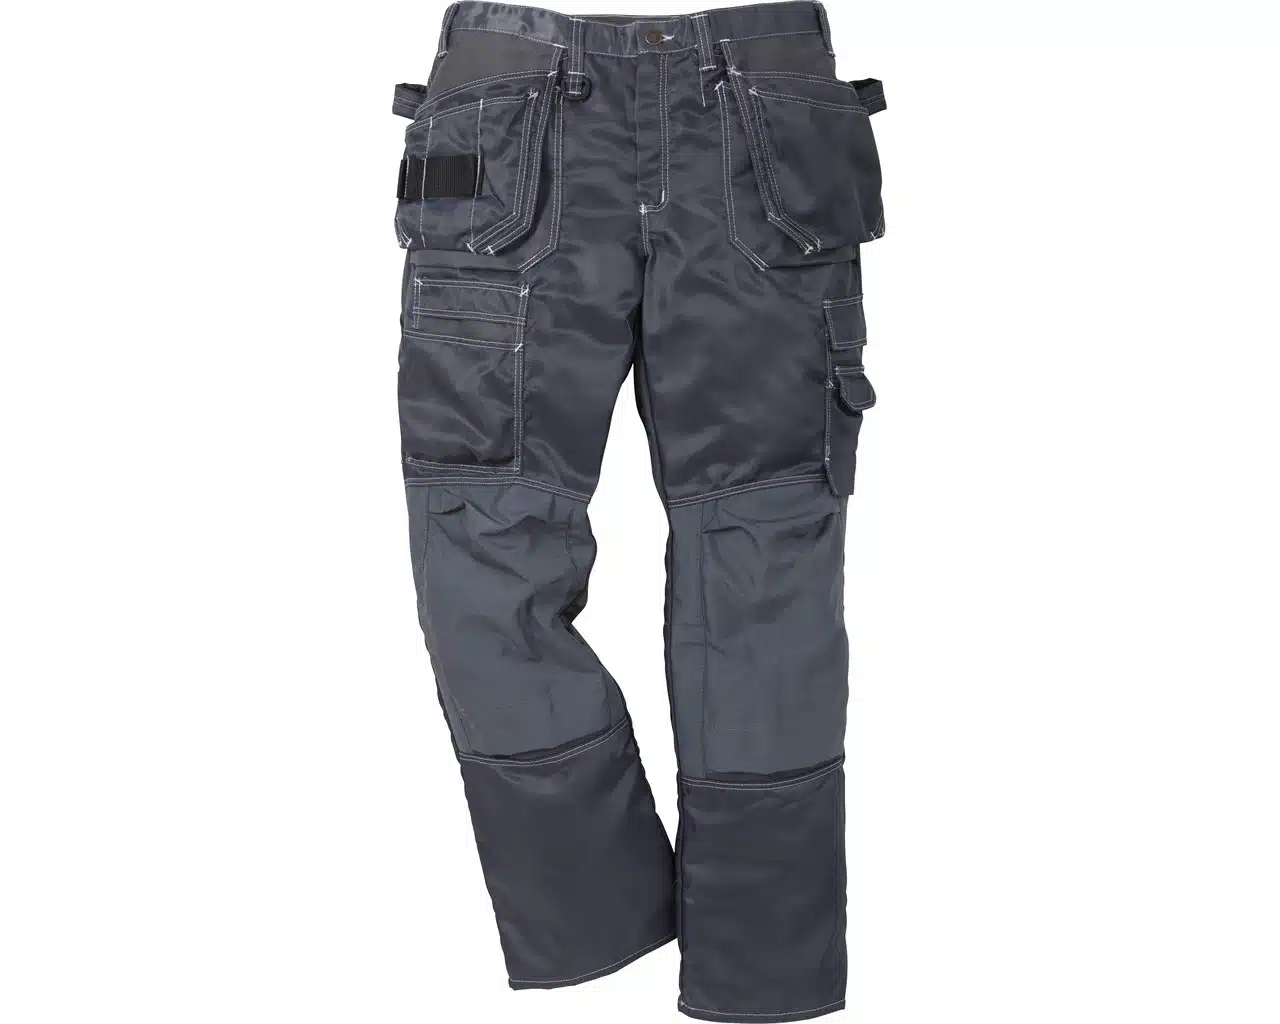 Pro Crafts Polydex Craftsman Trousers AD-265K-GREY-C44